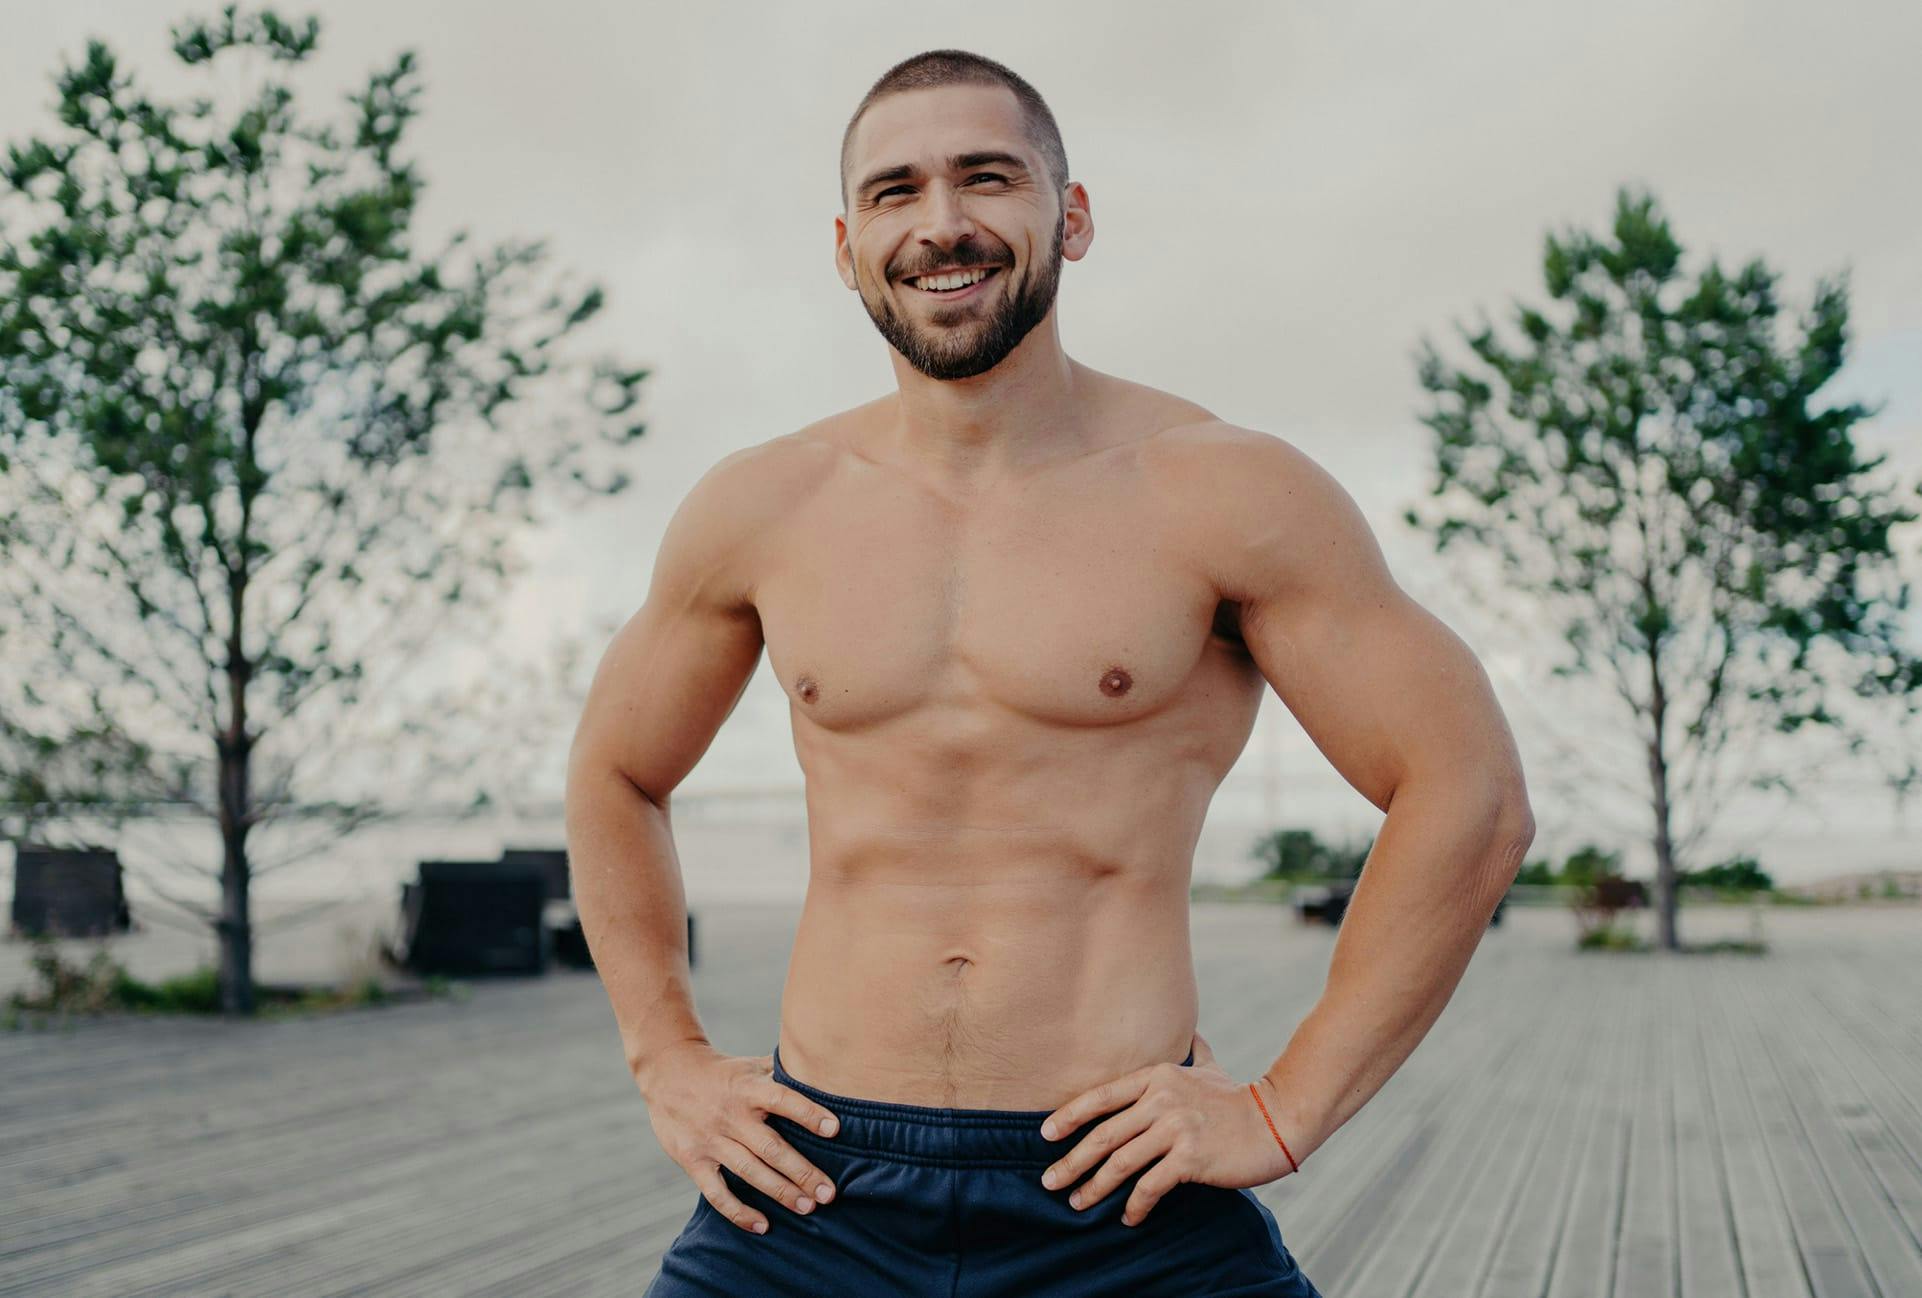 Man in great shape with his shirt off